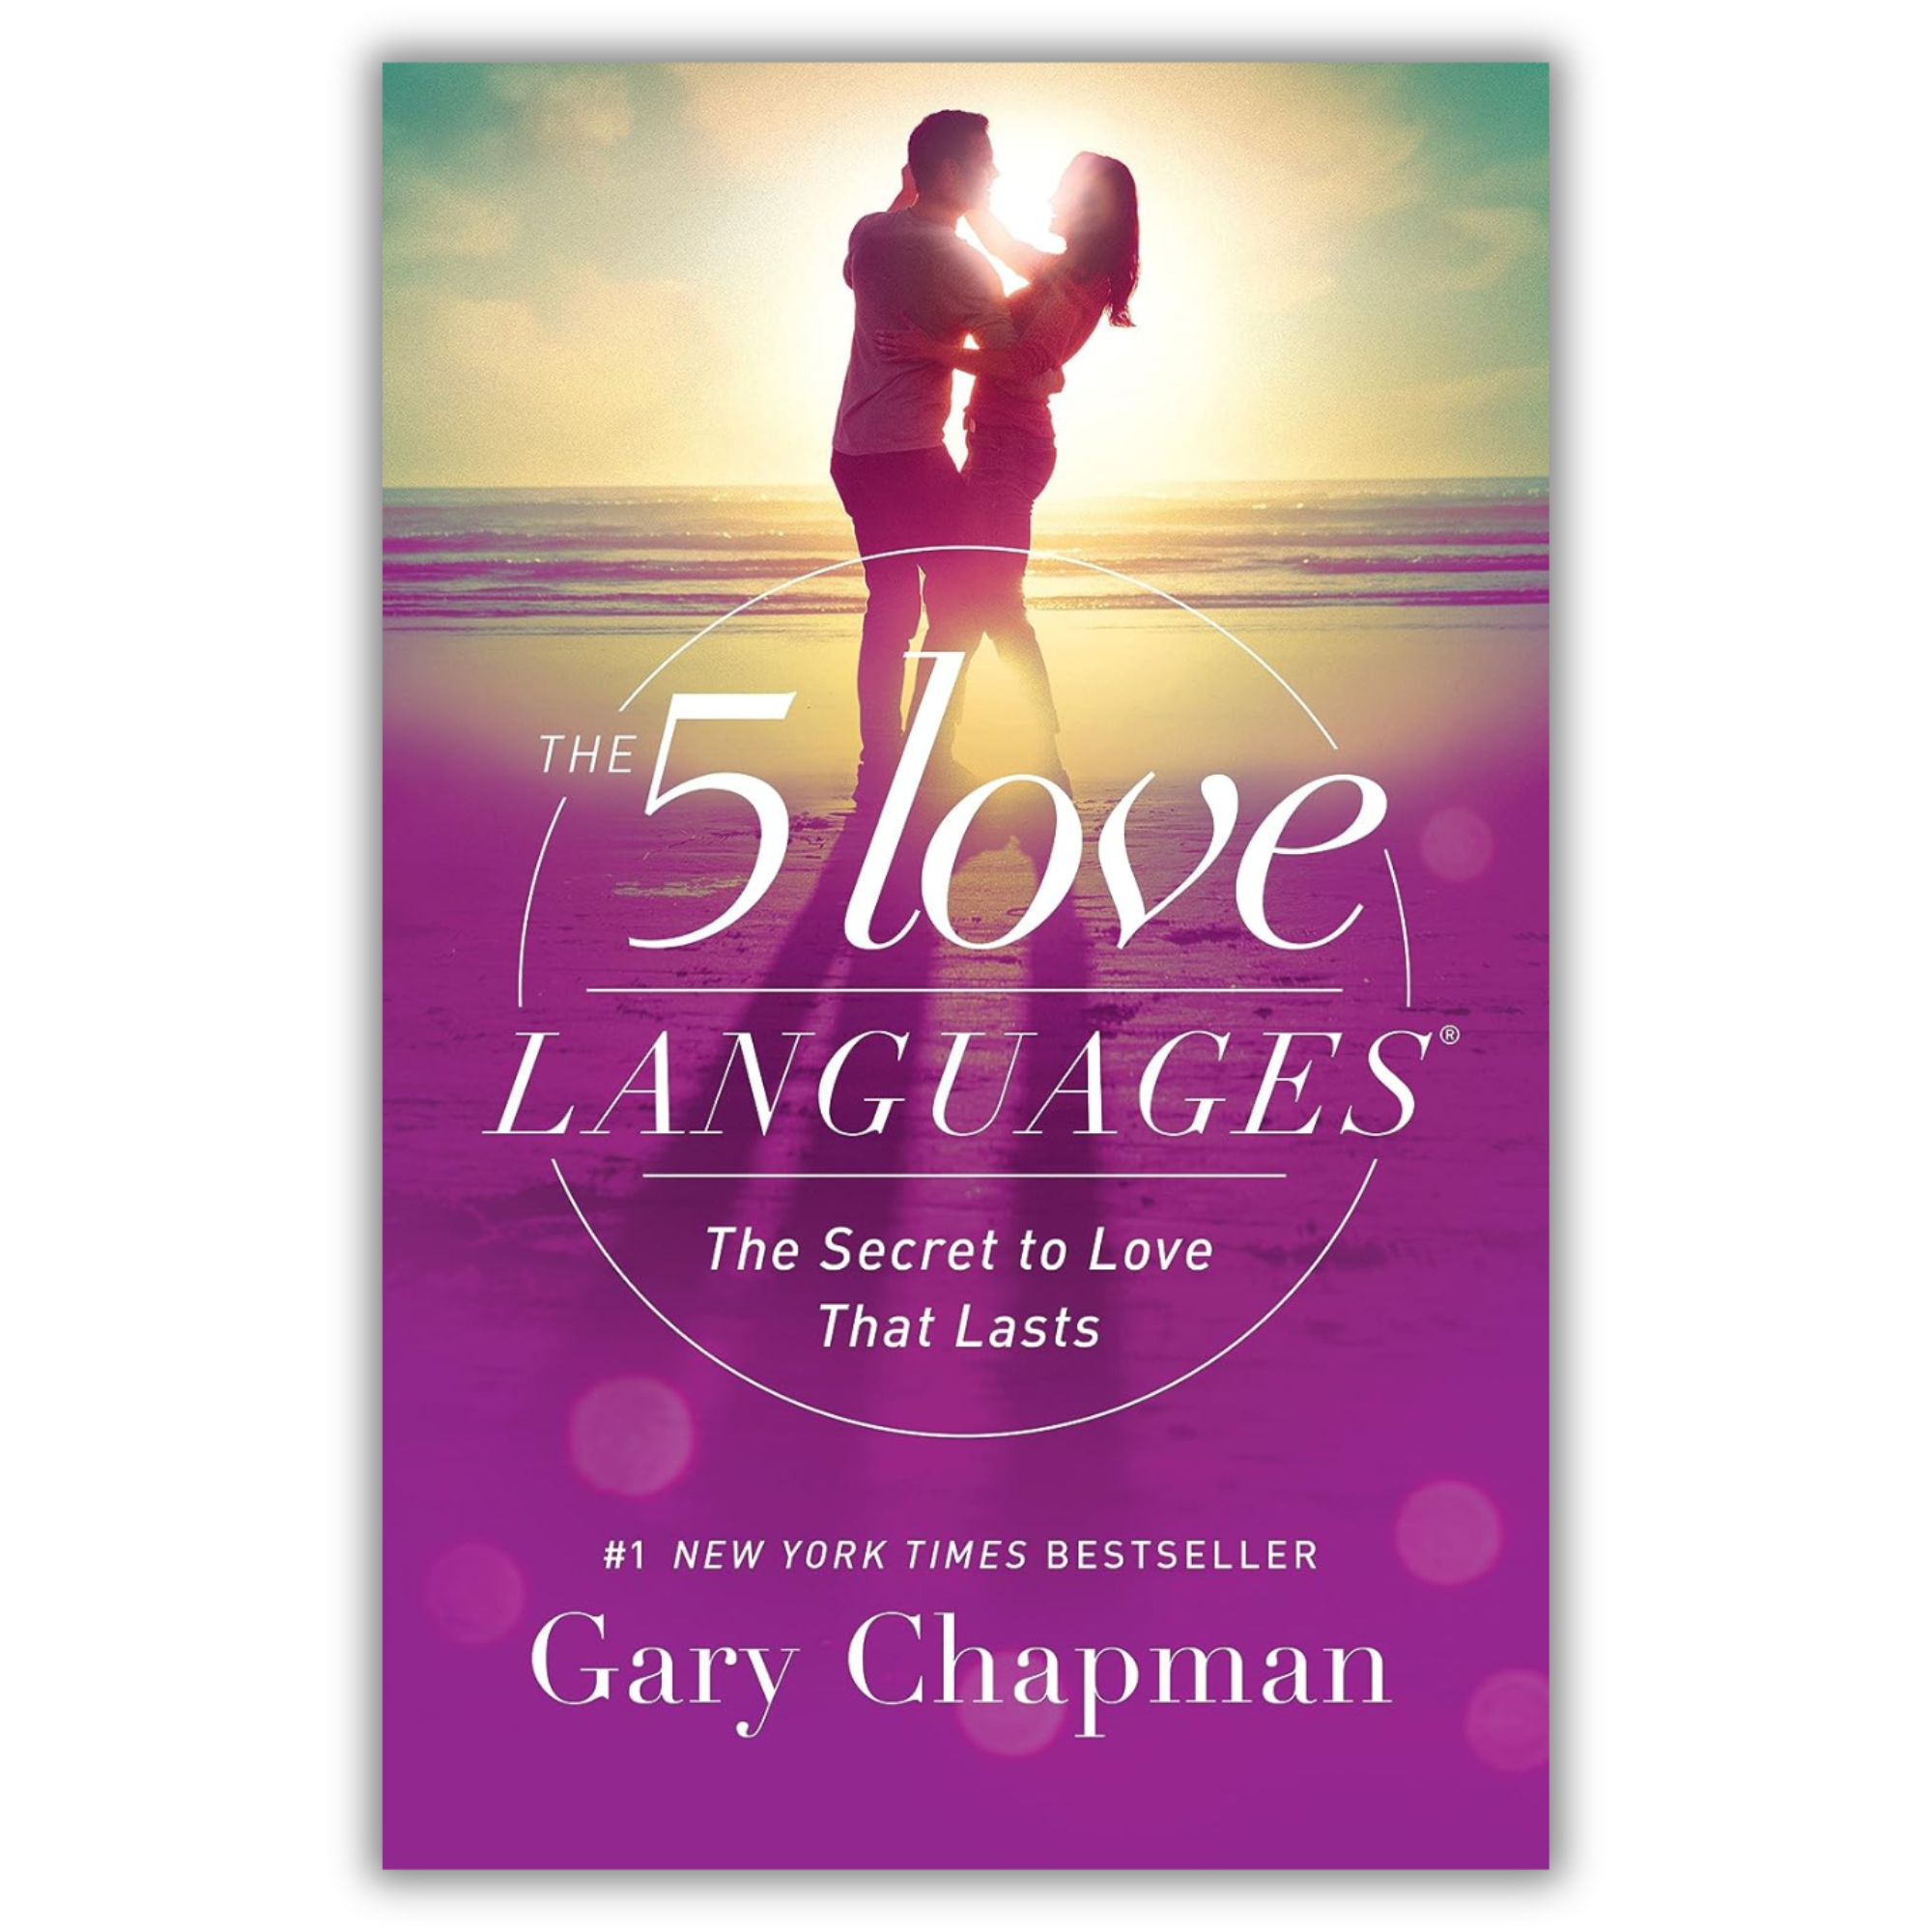 'The 5 Love Languages' book